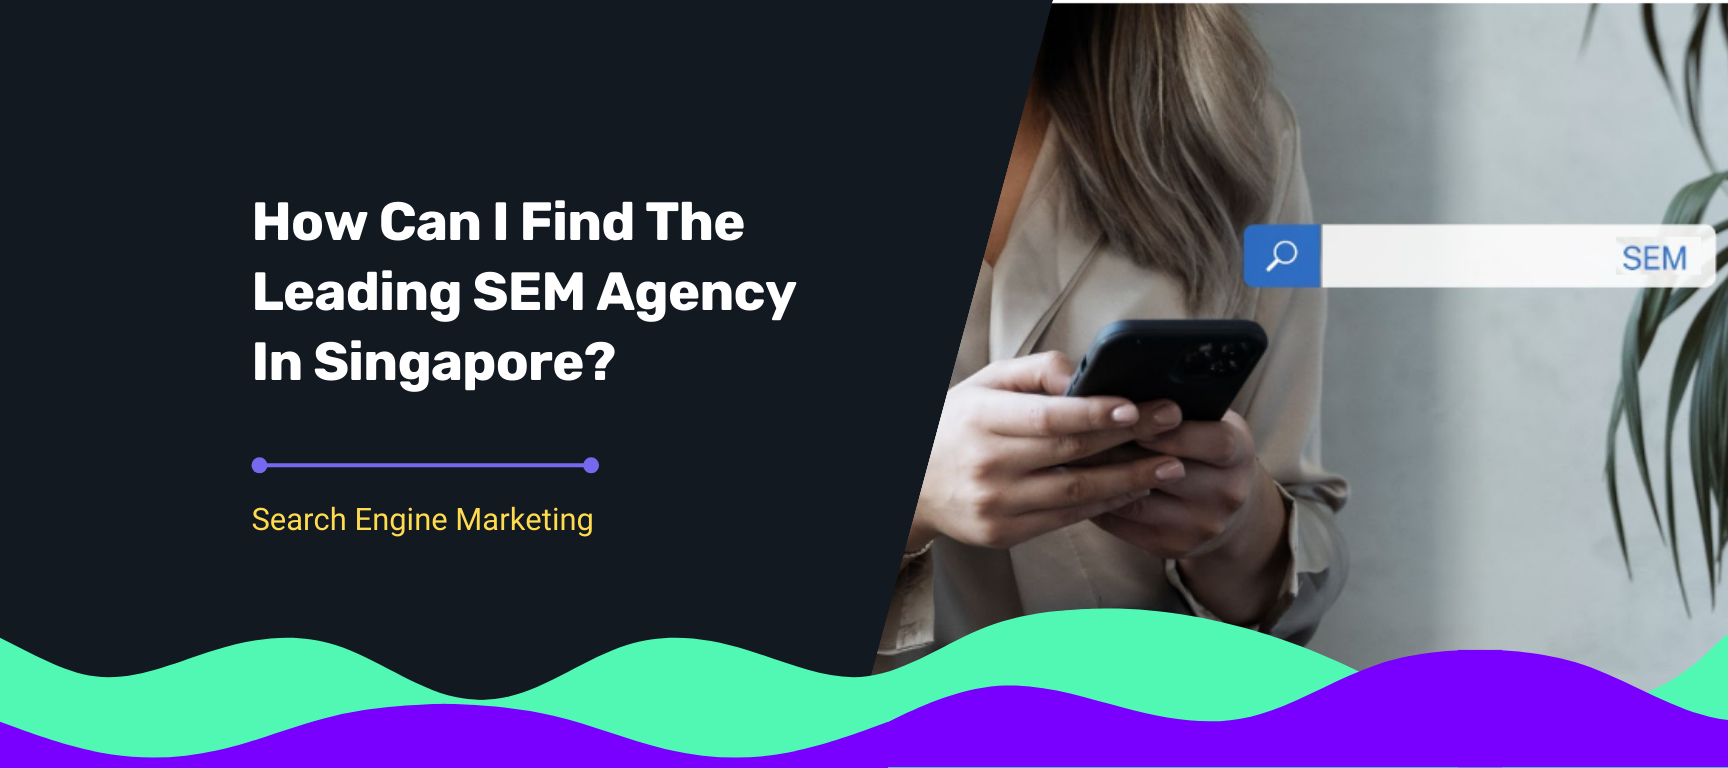 How Can You Find SEM Services In Singapore?